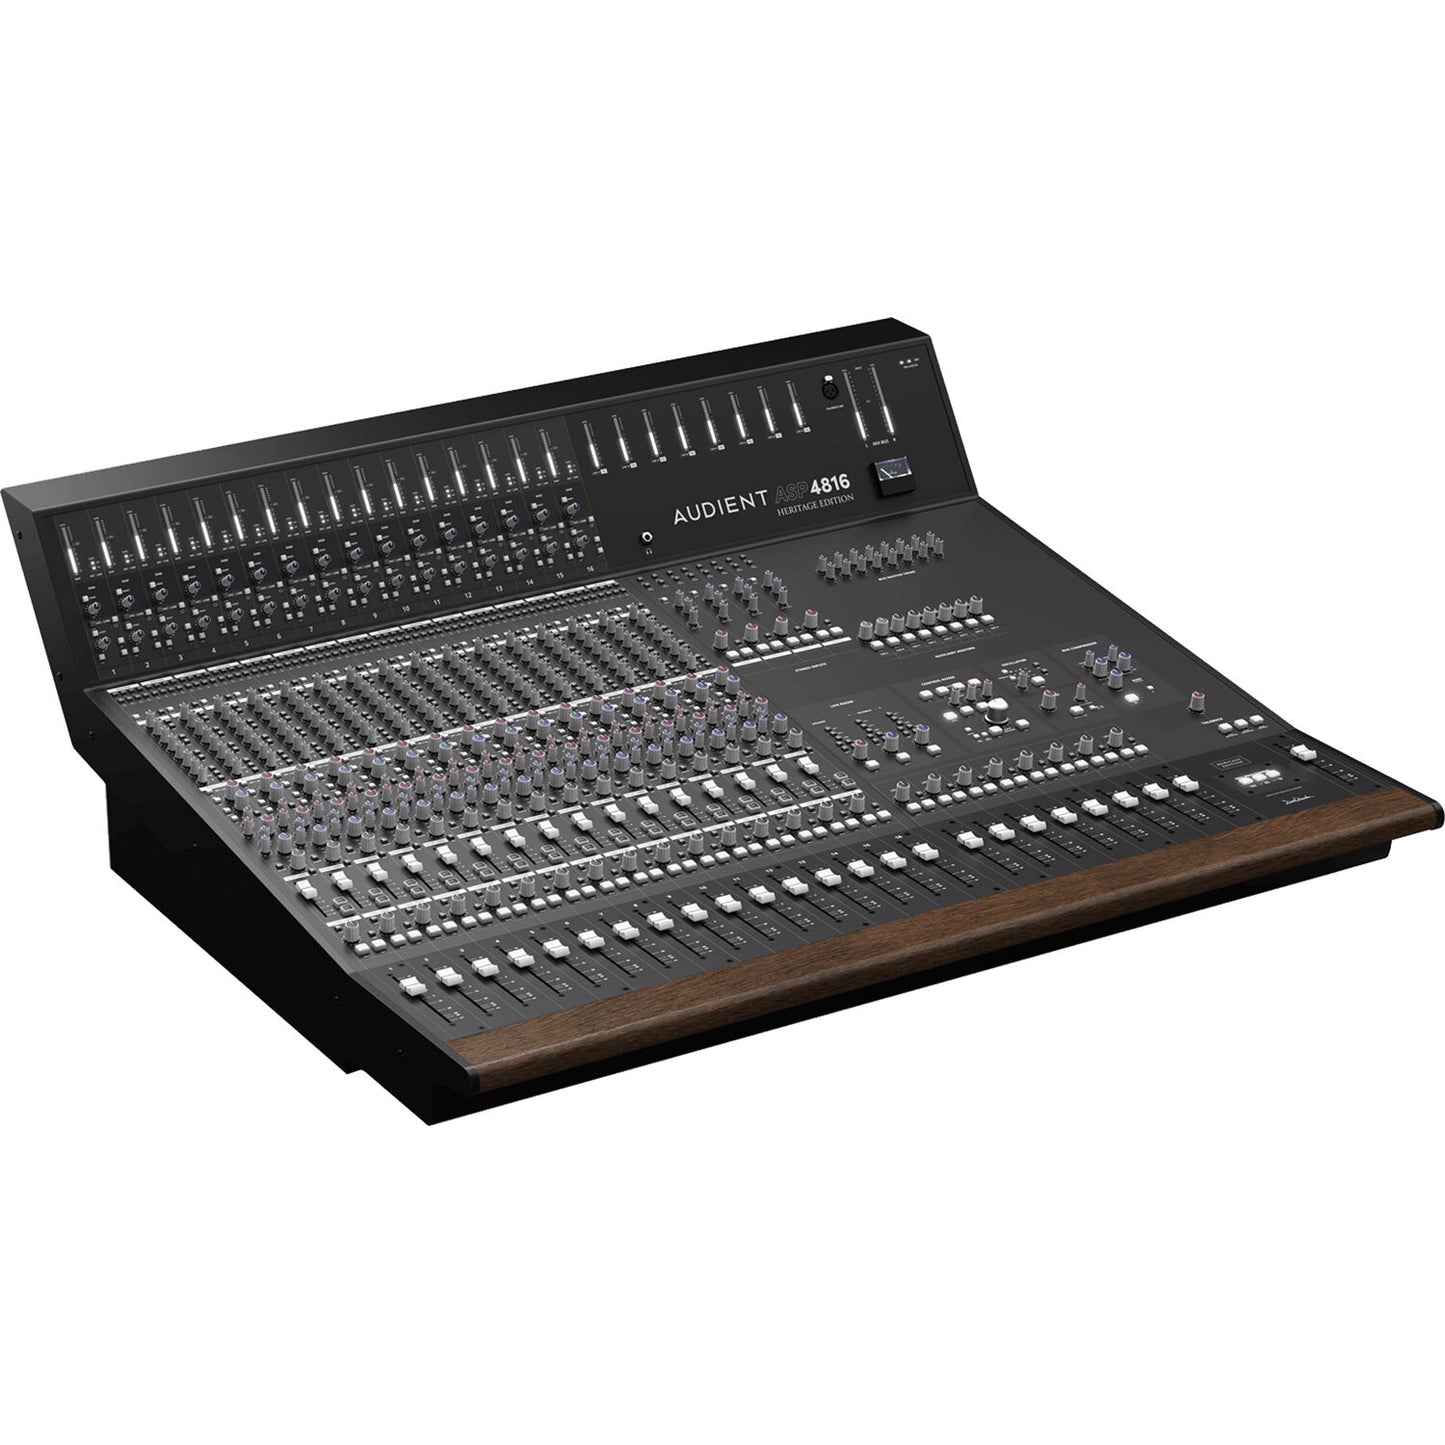 Audient ASP4816-HE Compact Analogue Recording Console - Heritage Edition